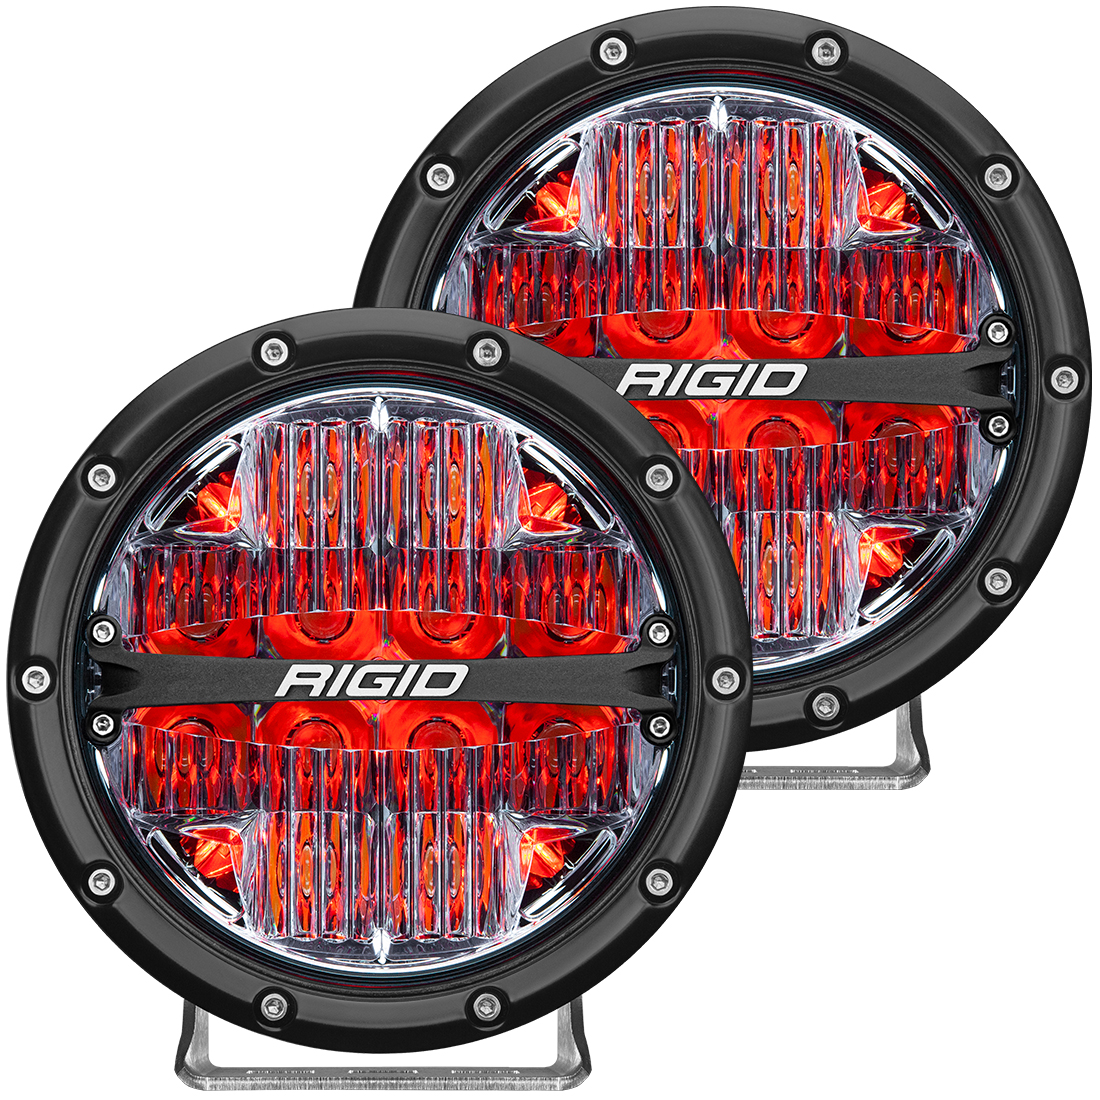 Rigid Industries 360-Series 6 Inch Led Off-Road Drive Beam Red Backlight Pair